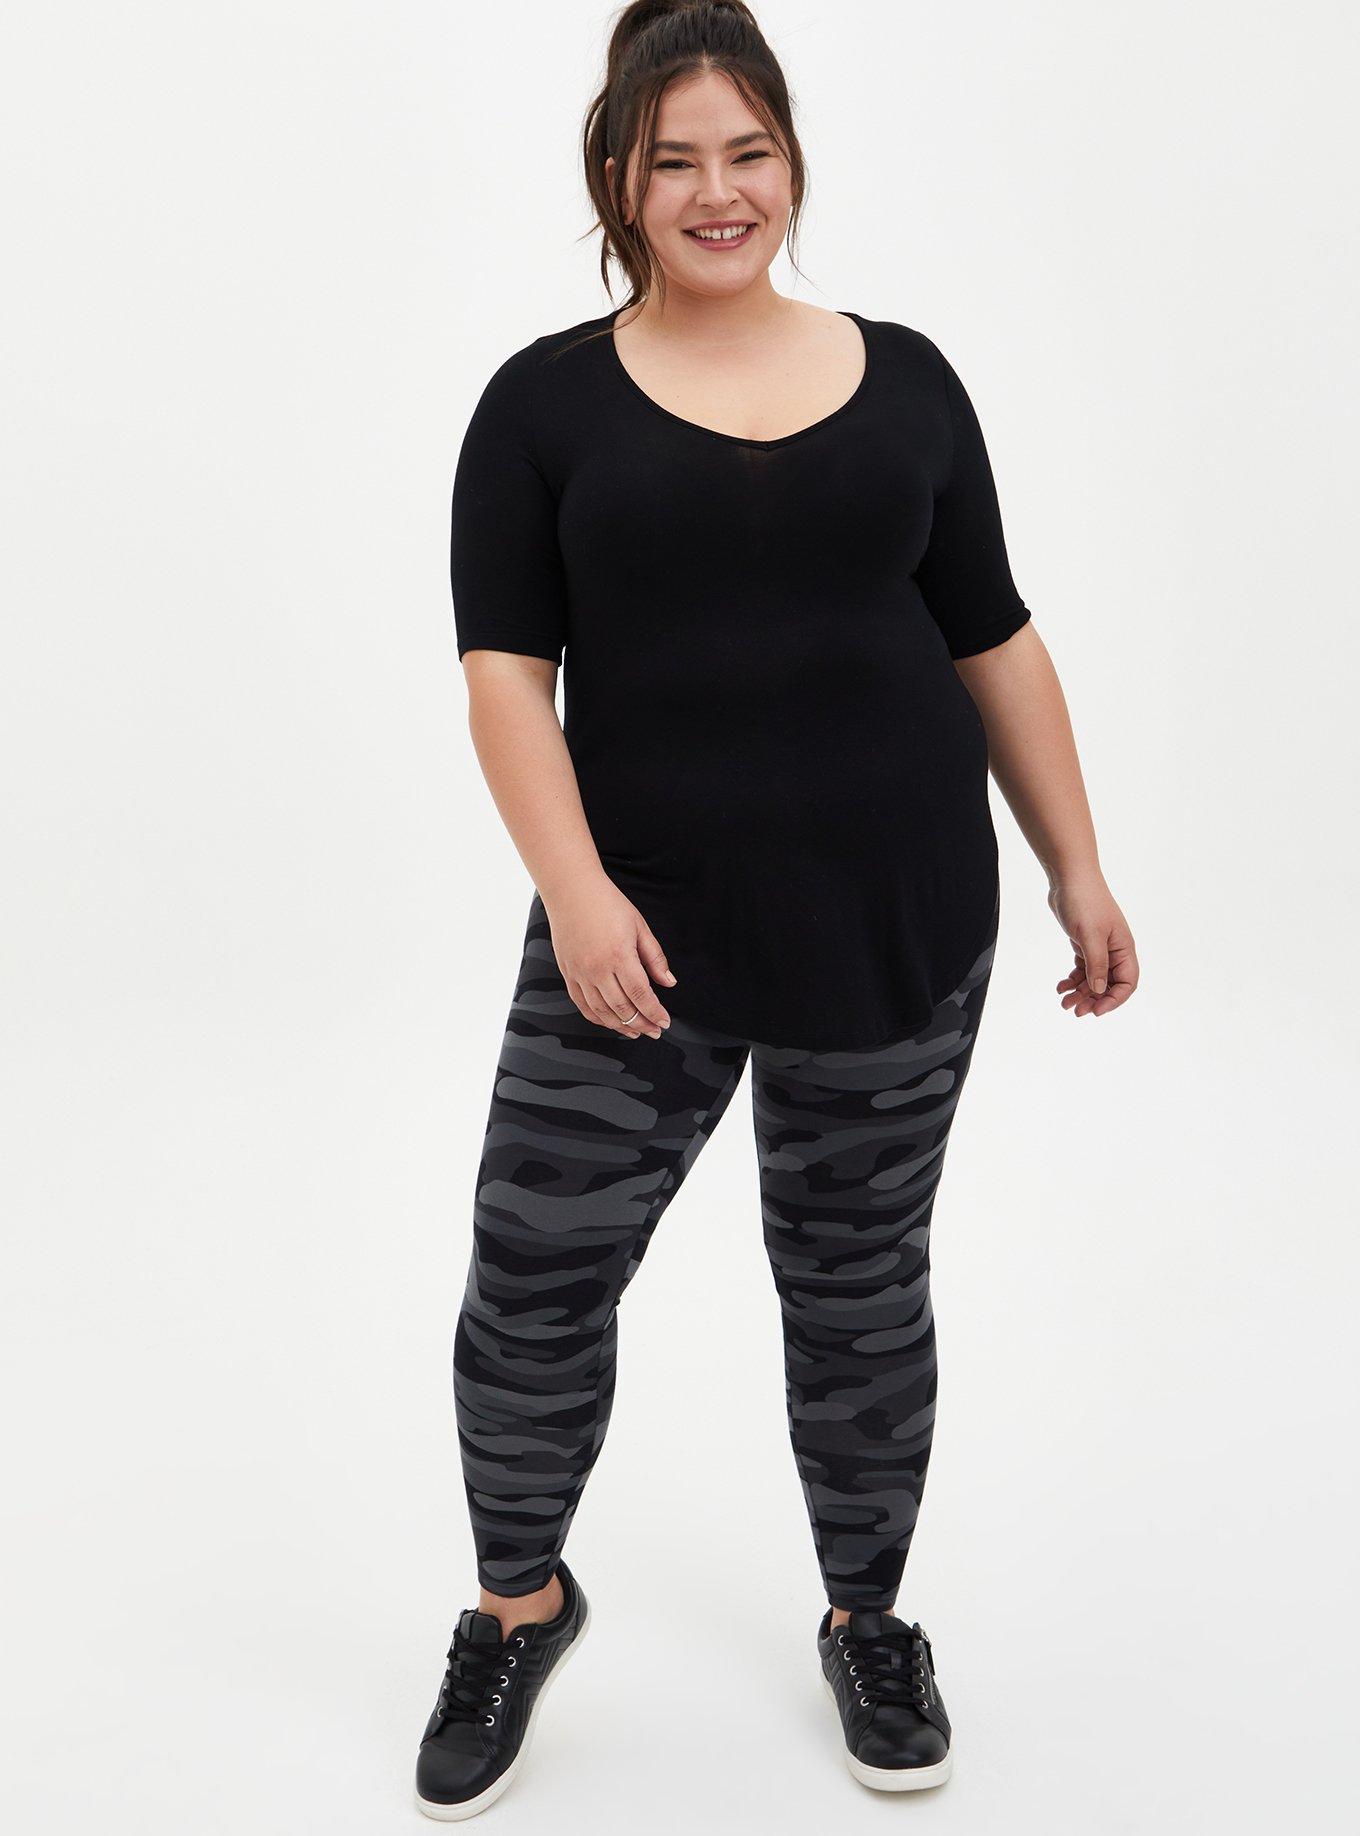 Torrid - Hi, Torrid fam! We have been working hard to make Torrid the best  brand we can be for all of you. We're rolling out more than 200 styles in  sizes